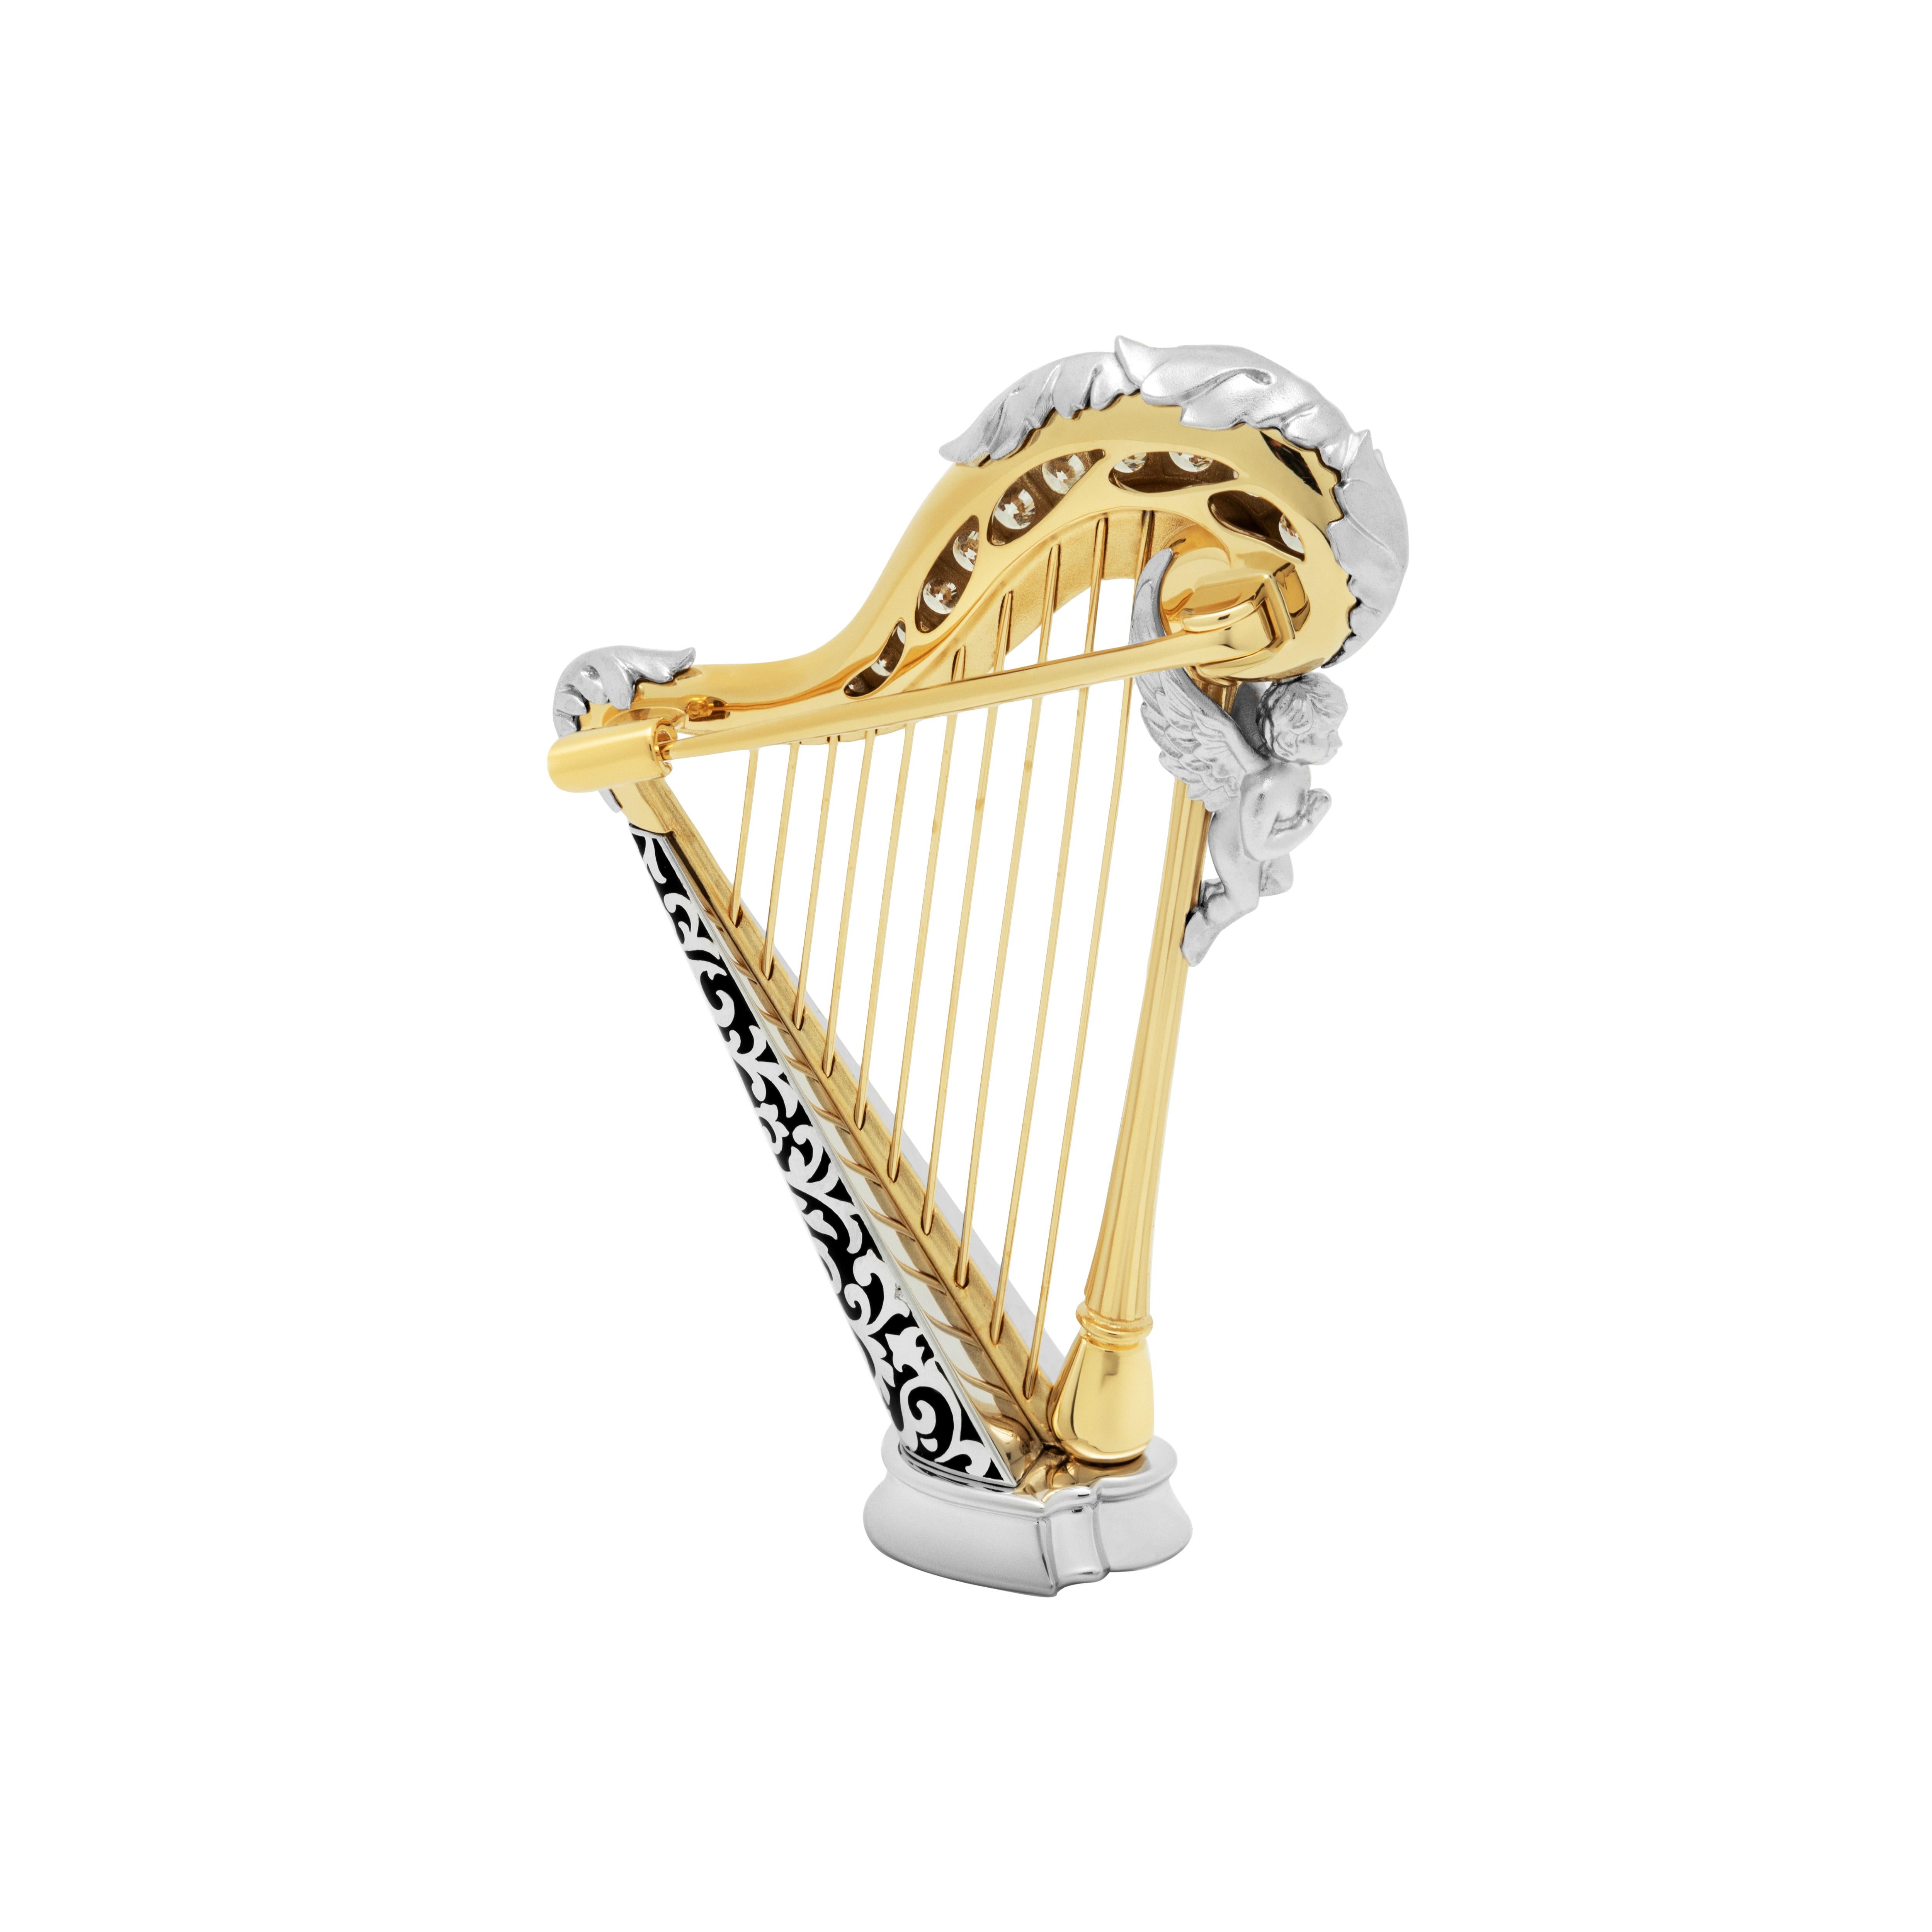 Diamonds 18 Karat White Yellow Gold Harp Brooch
Harps were widely used in the ancient Mediterranean and Middle East, although rare in Greece and Rome; depictions survive from Egypt and Mesopotamia from about 3000 BCE. 
Thanks to its “universal